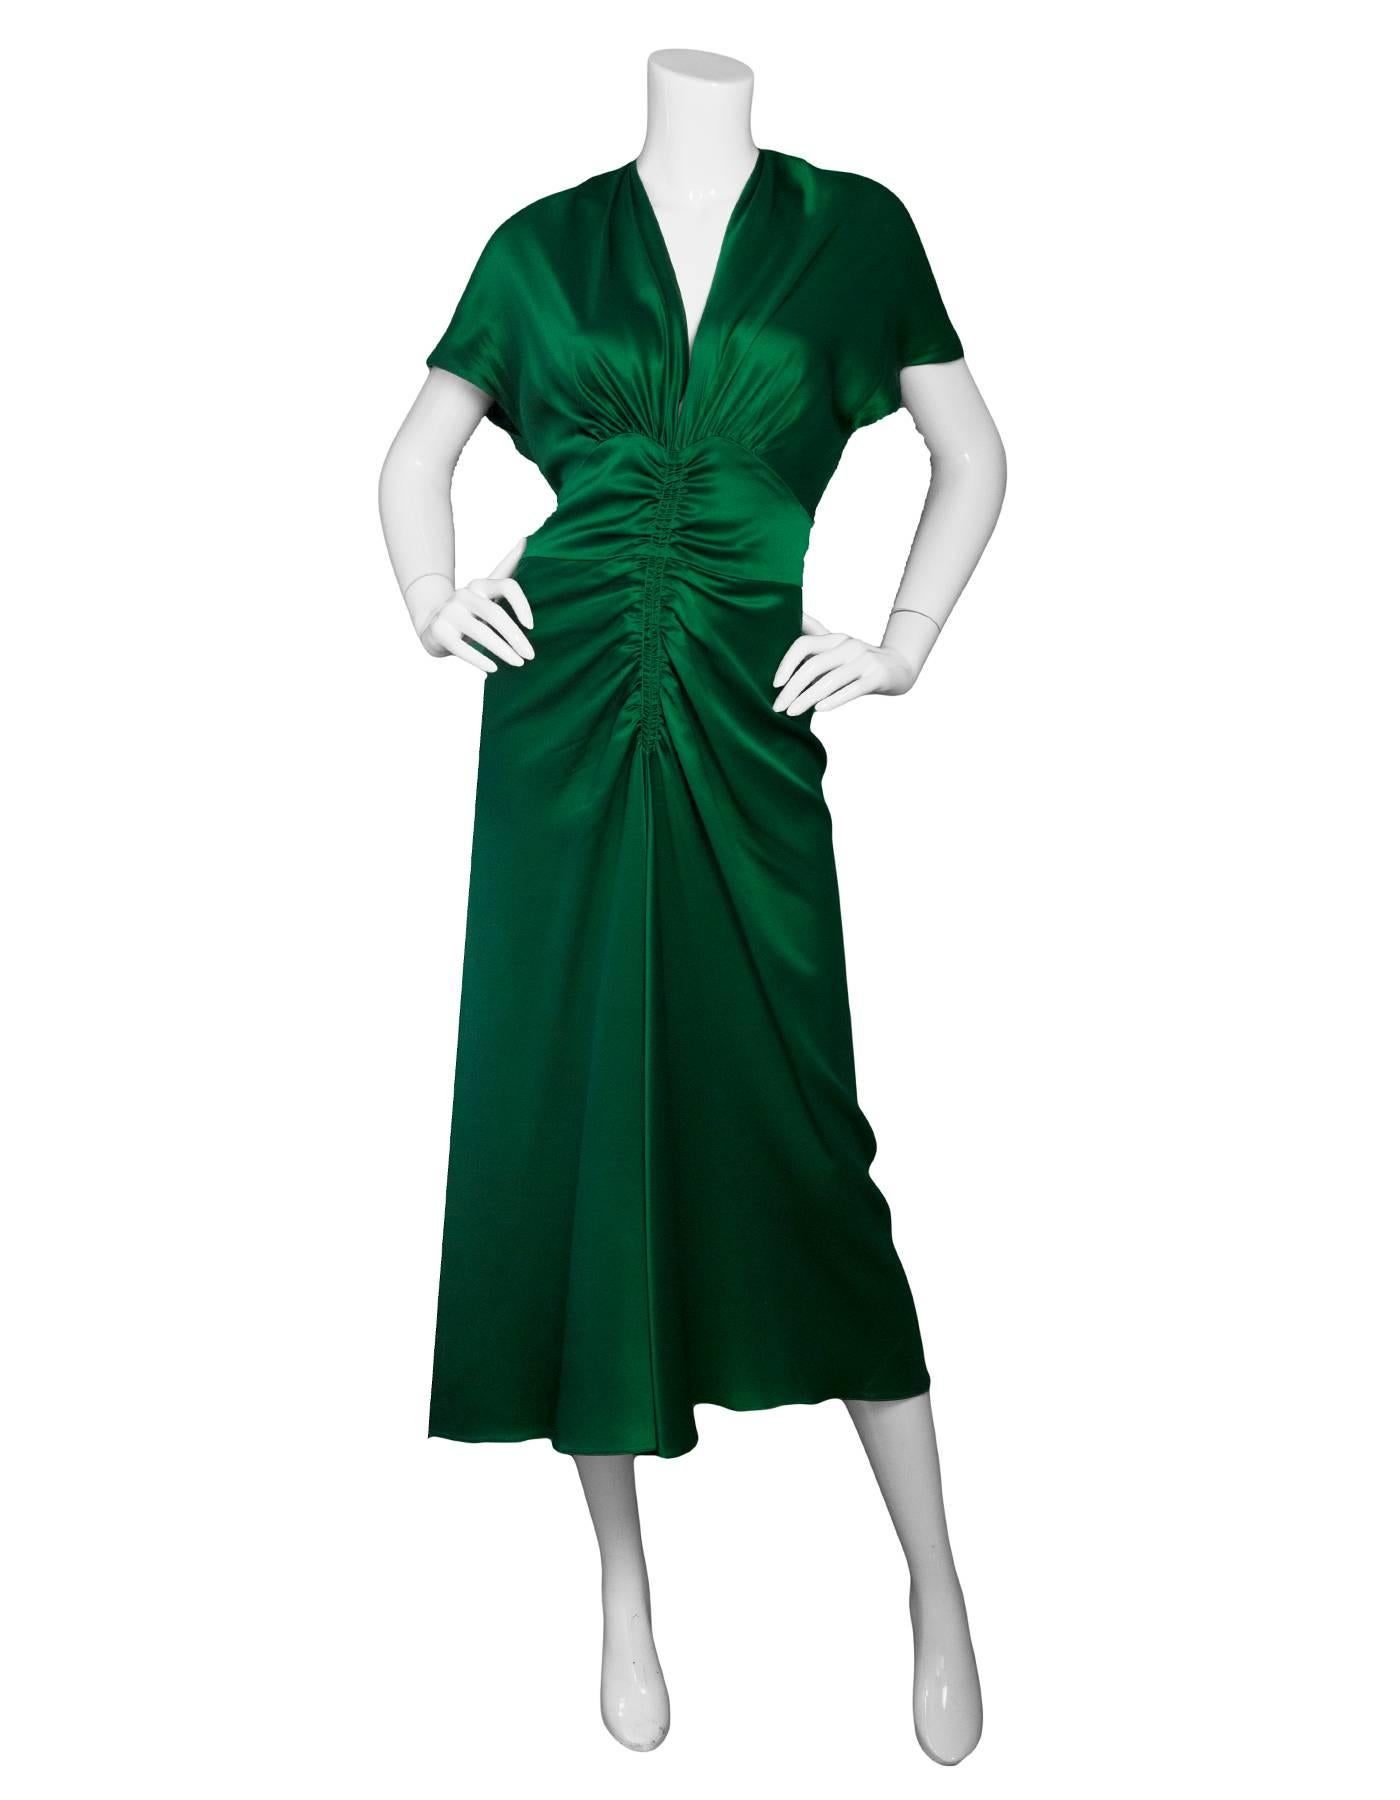 Luisa Beccaria Green Silk Ruched Dress Sz IT44

Features keyhole at back

Made In: Italy
Color: Green
Composition: 92% Silk, 8% lycra
Lining: None
Closure/Opening: Zlip closure at back
Overall Condition: Excellent pre-owned condition, small